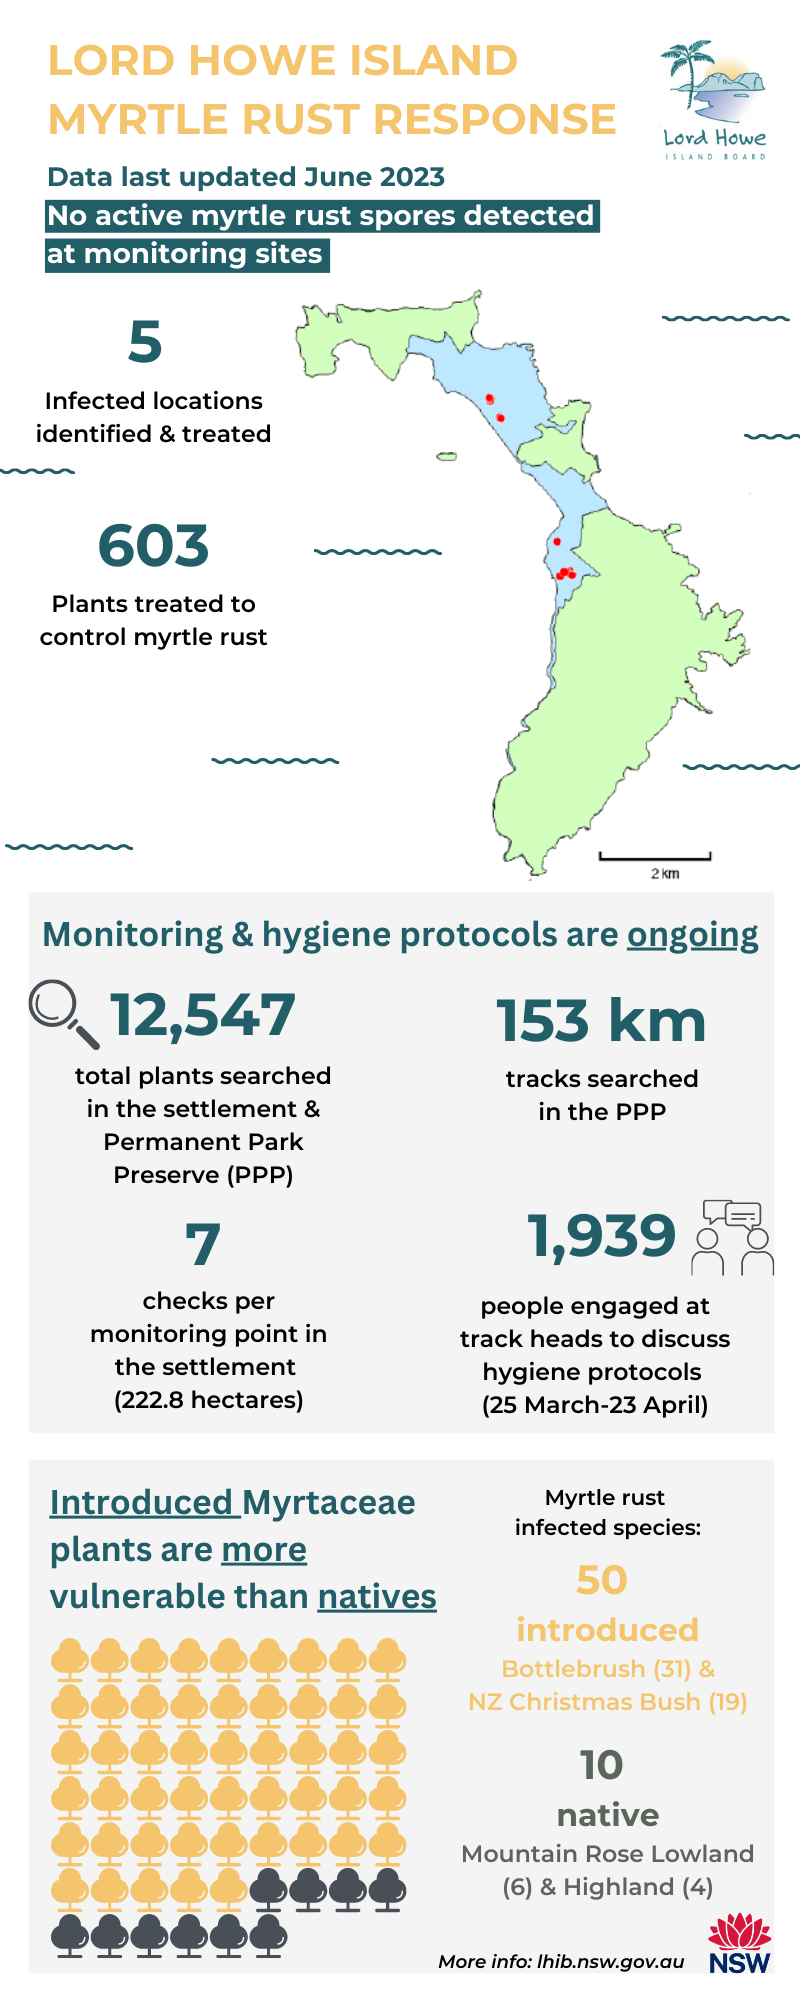 An infographic with data about Lord Howe Island's response to a myrtle rust incursion